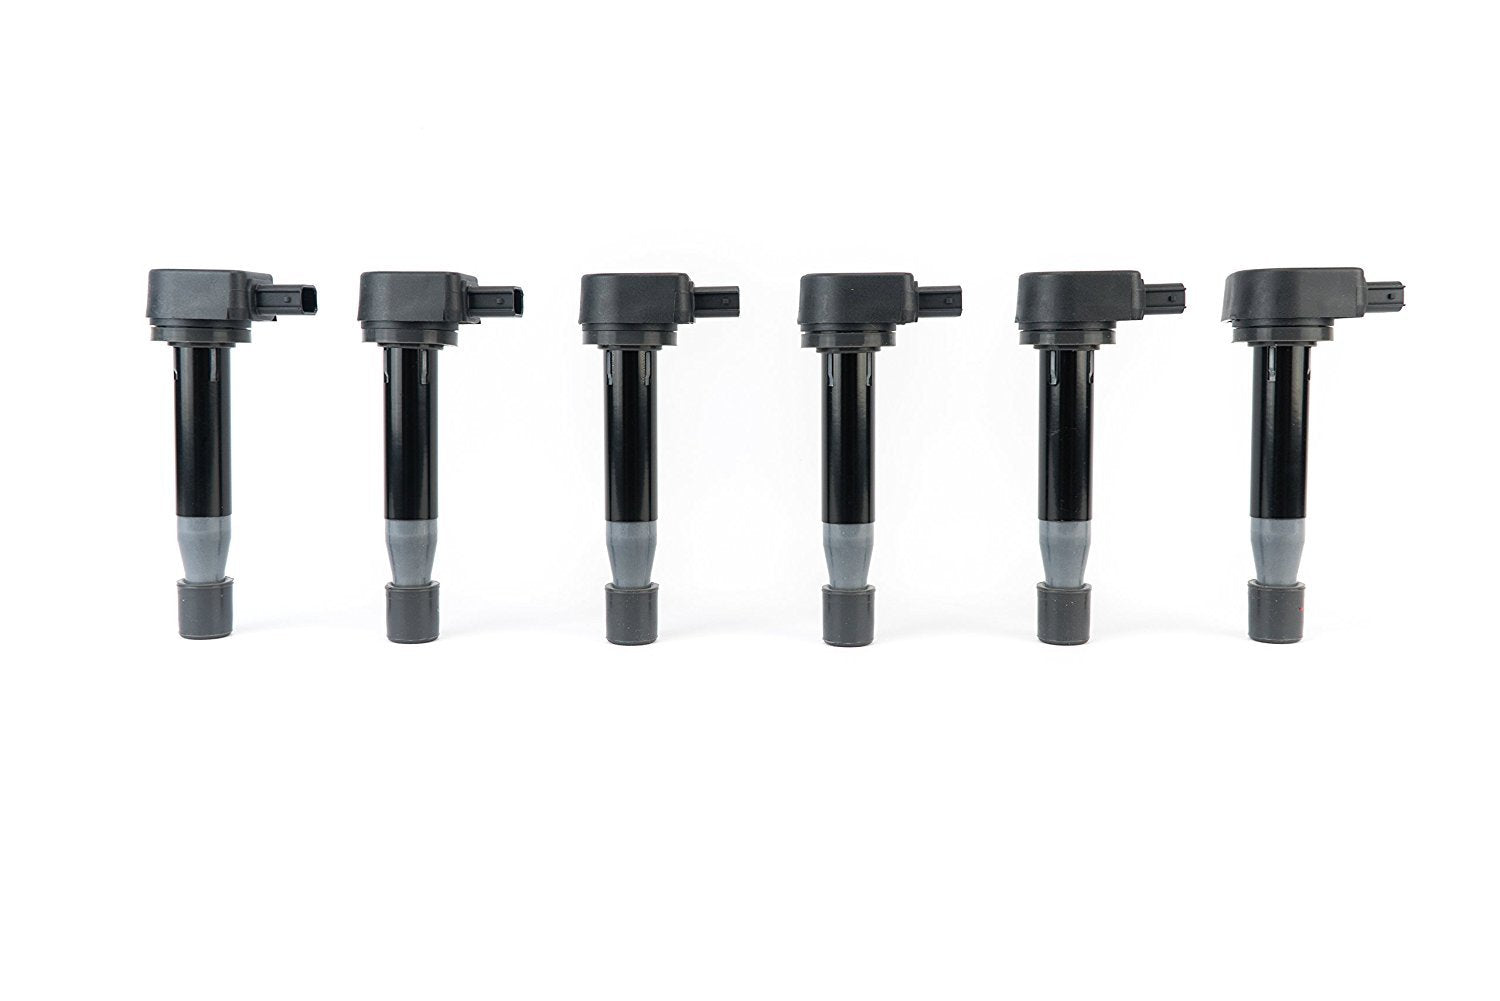 Ignition Coil Pack Set of 6 - Compatible with Honda, Acura, Saturn Vehicles - TL 3.2 V6 1999-2008 - CL, RL 2005-2011 - Odyssey 1999-2010 - Accord V6 - Replaces 610-58547B, 30520-RCA-A02  - Very Good